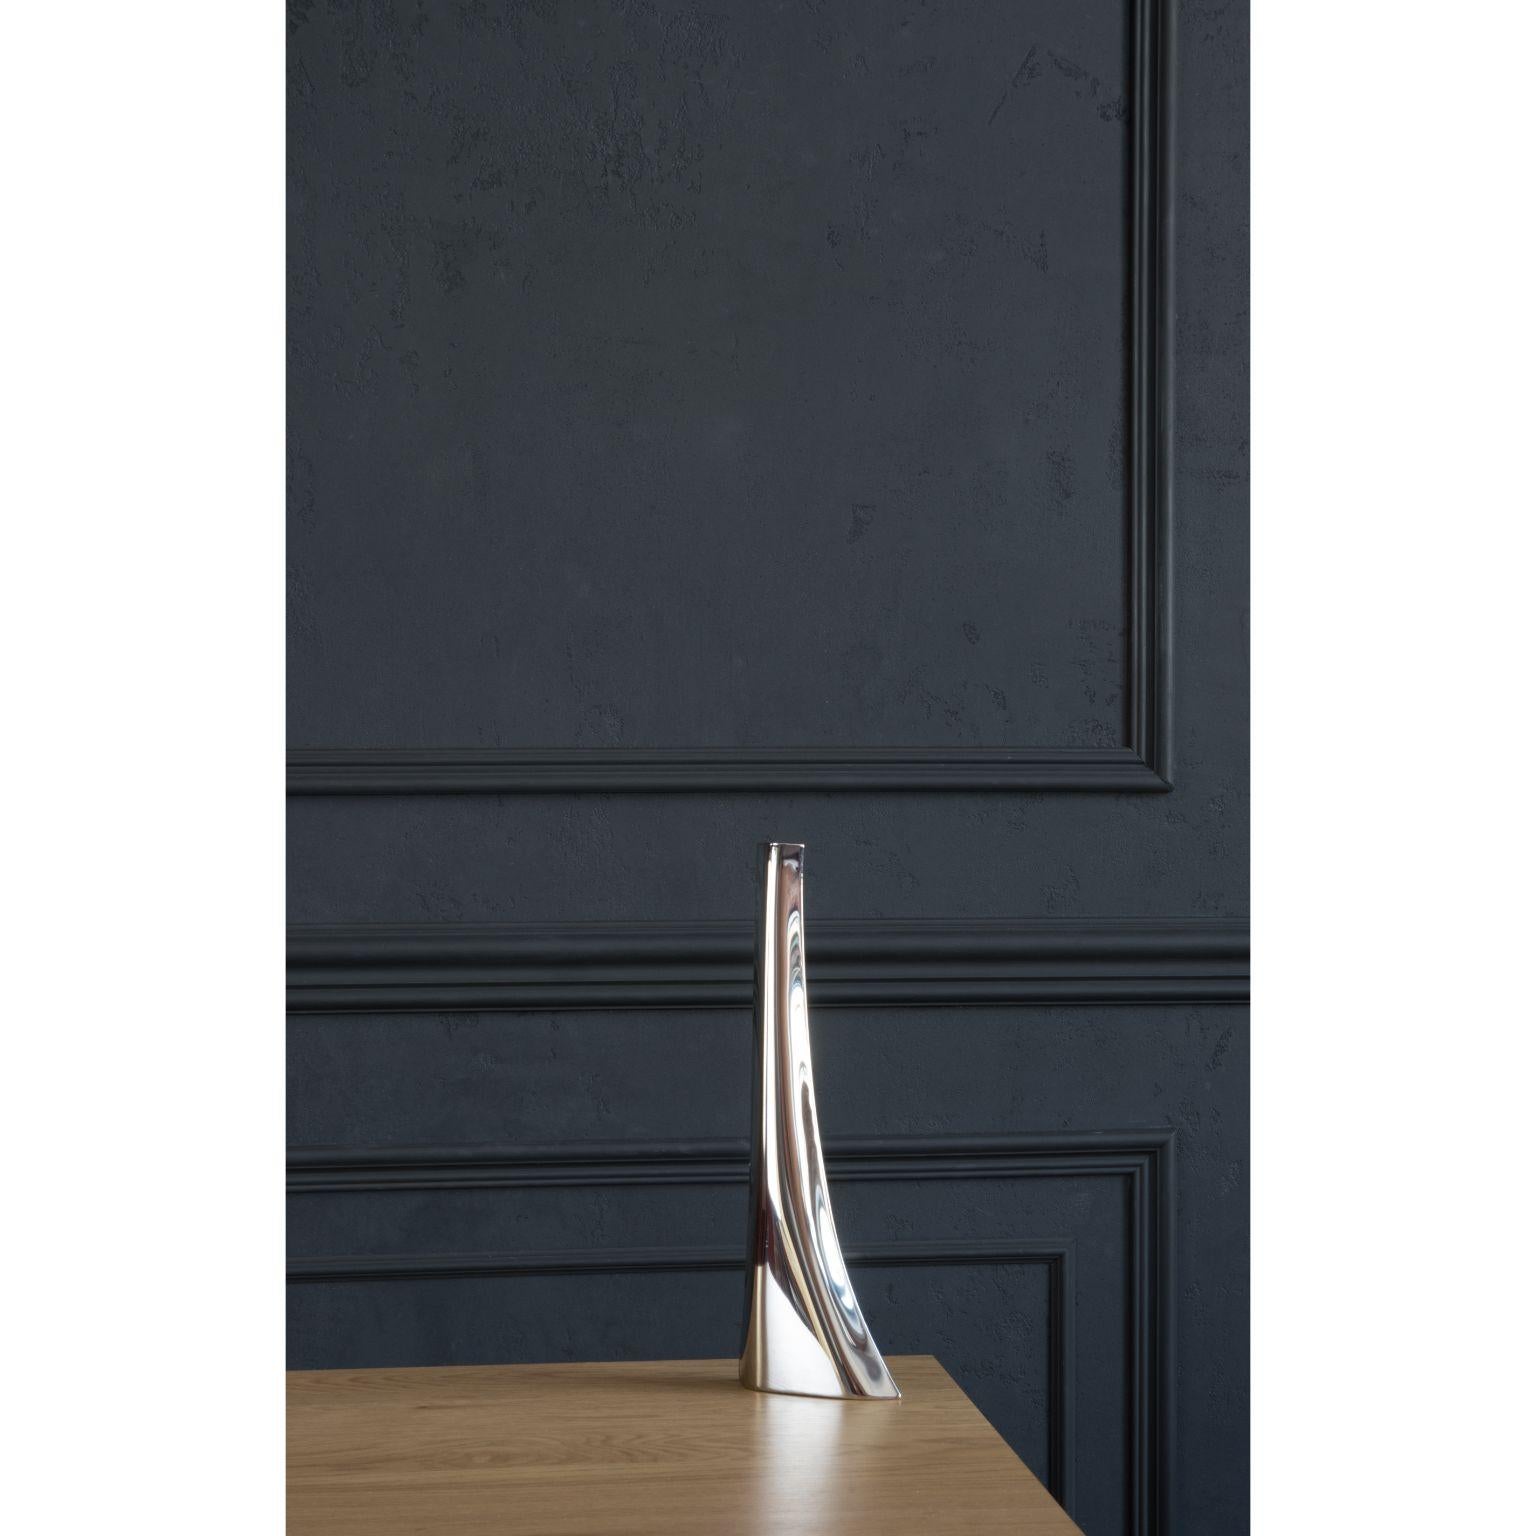 Leyki Vase 32 by Zieta
Dimensions: D 11 x W 10.5 x H 32 cm.
Materials: Polished stainless steel.

Multifunctional subtlety
Leyki is a functional object with an architectural twist. It saturates expression
from slenderness and gloss. It translates